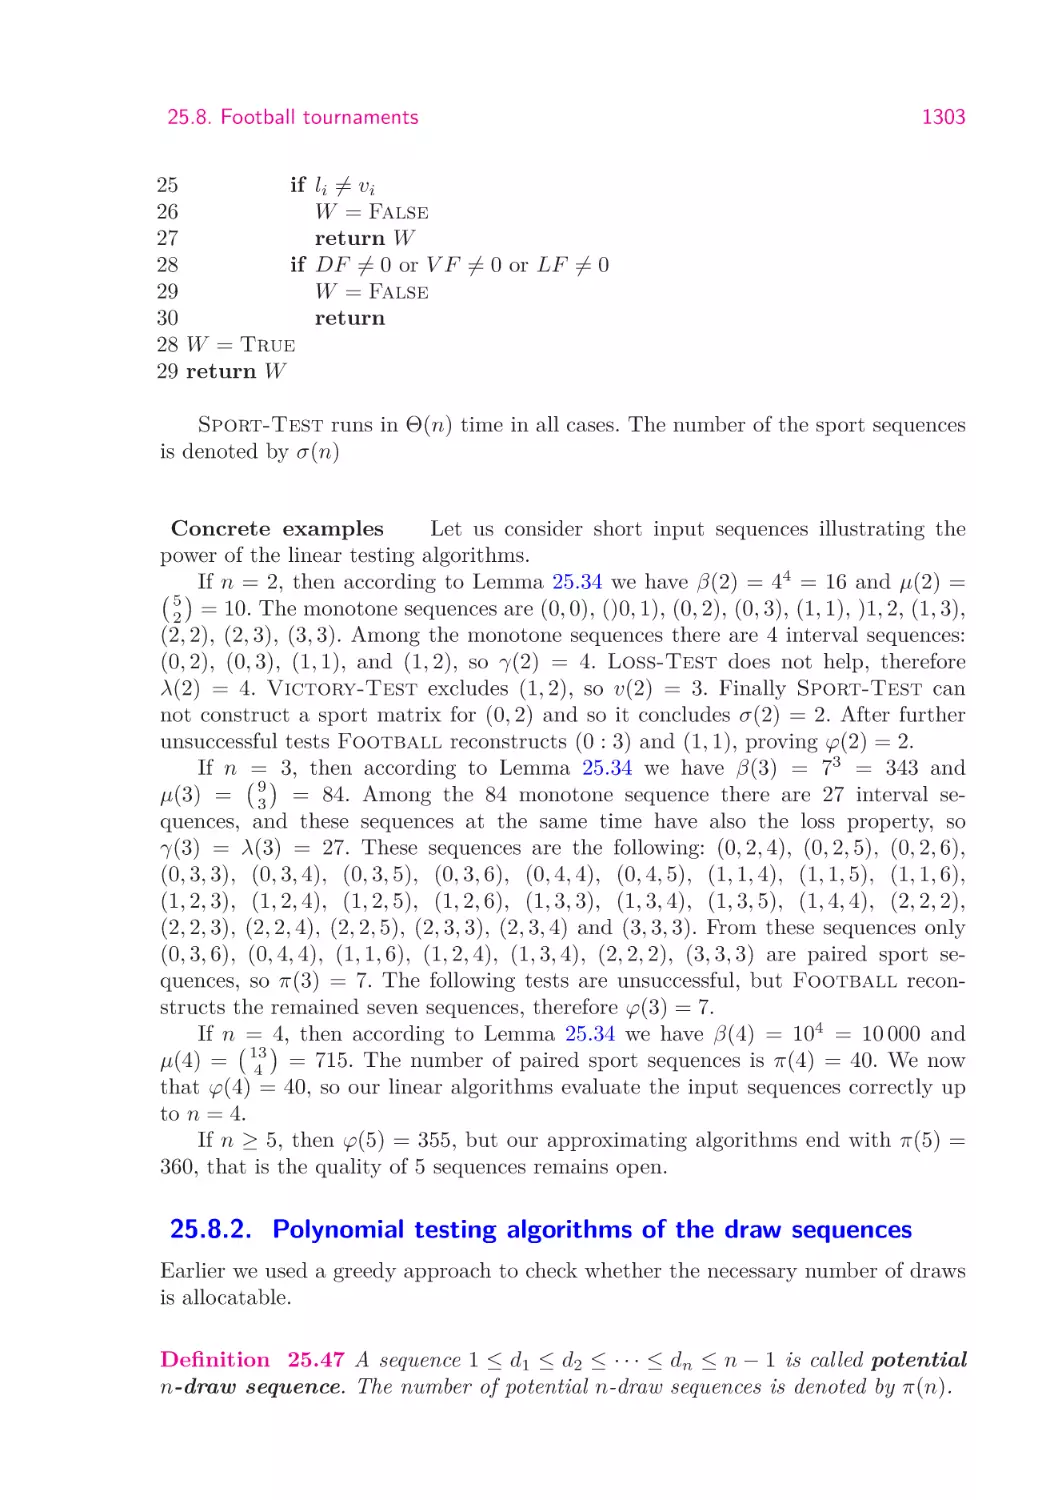 25.8.2.  Polynomial testing algorithms of the draw sequences